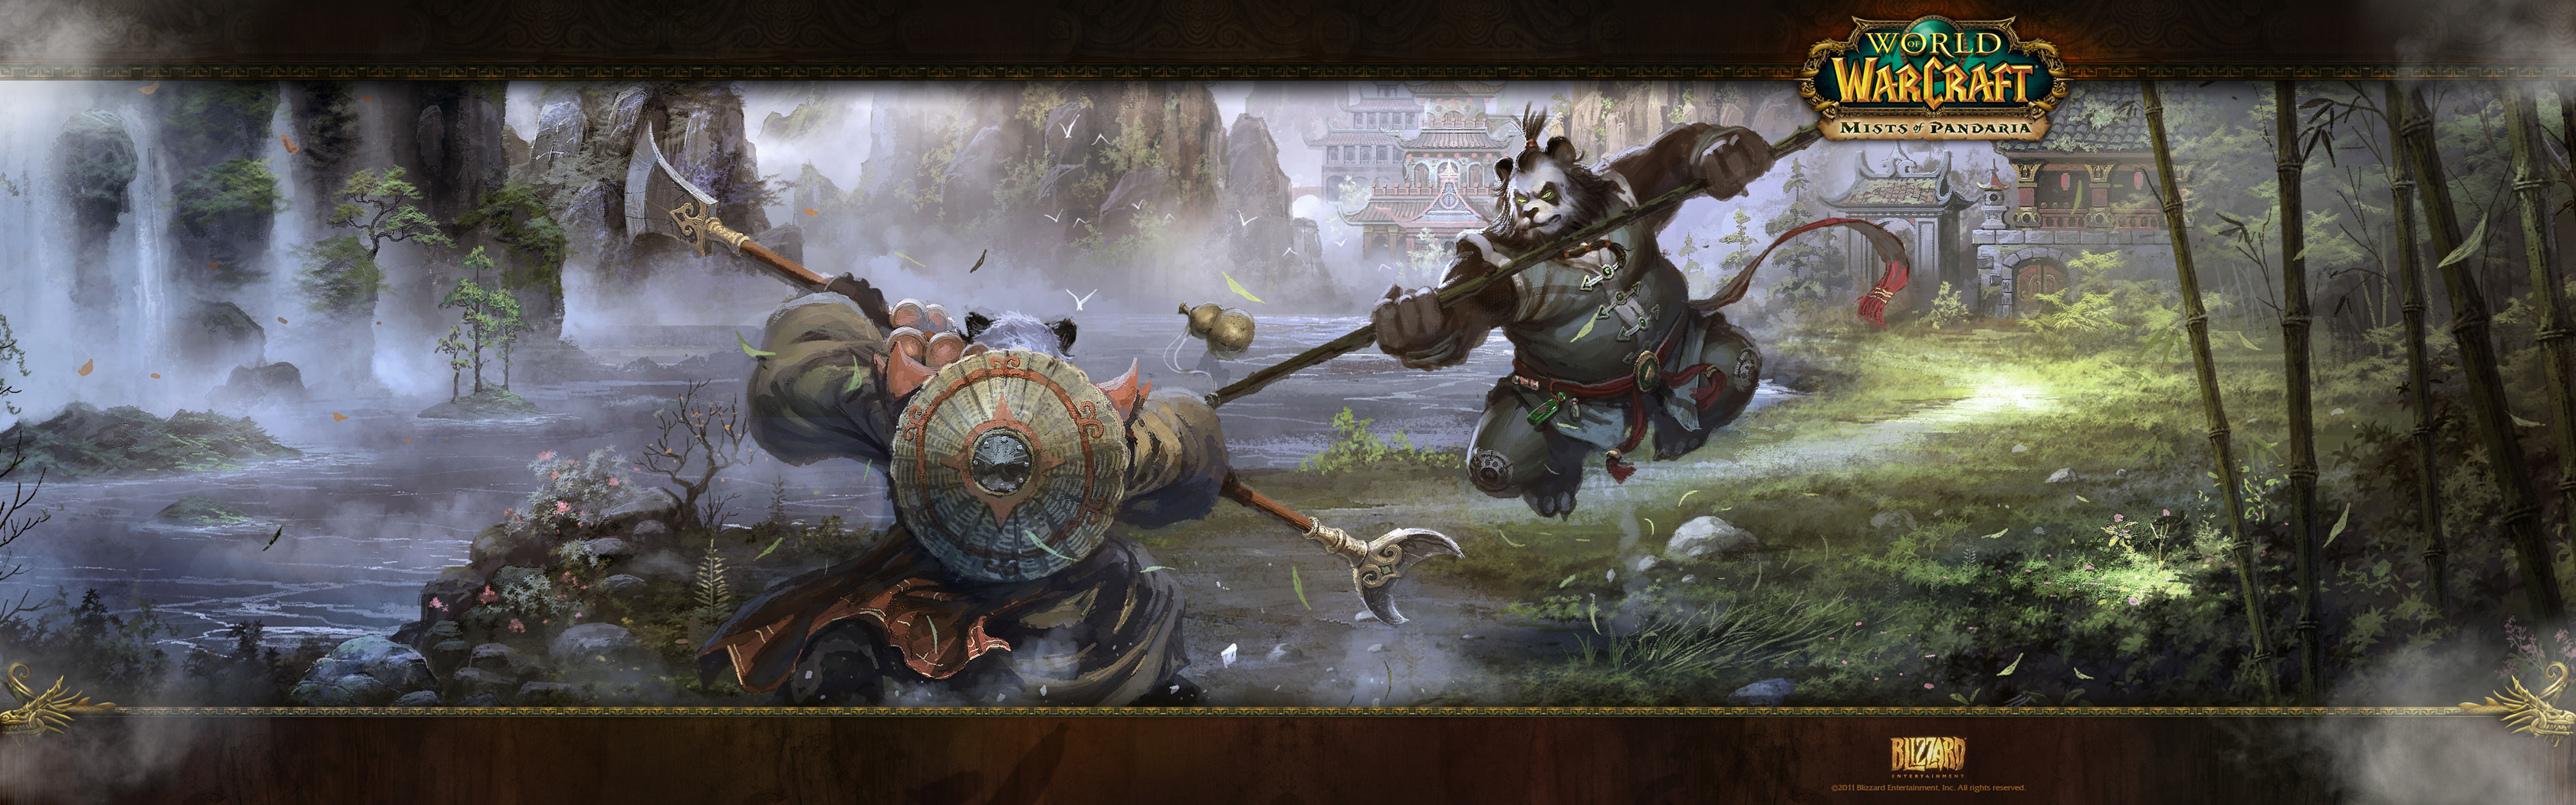 General 3360x1050 World of Warcraft: Mists of Pandaria Pandaren wide screen World of Warcraft video game art Blizzard Entertainment video game characters video games